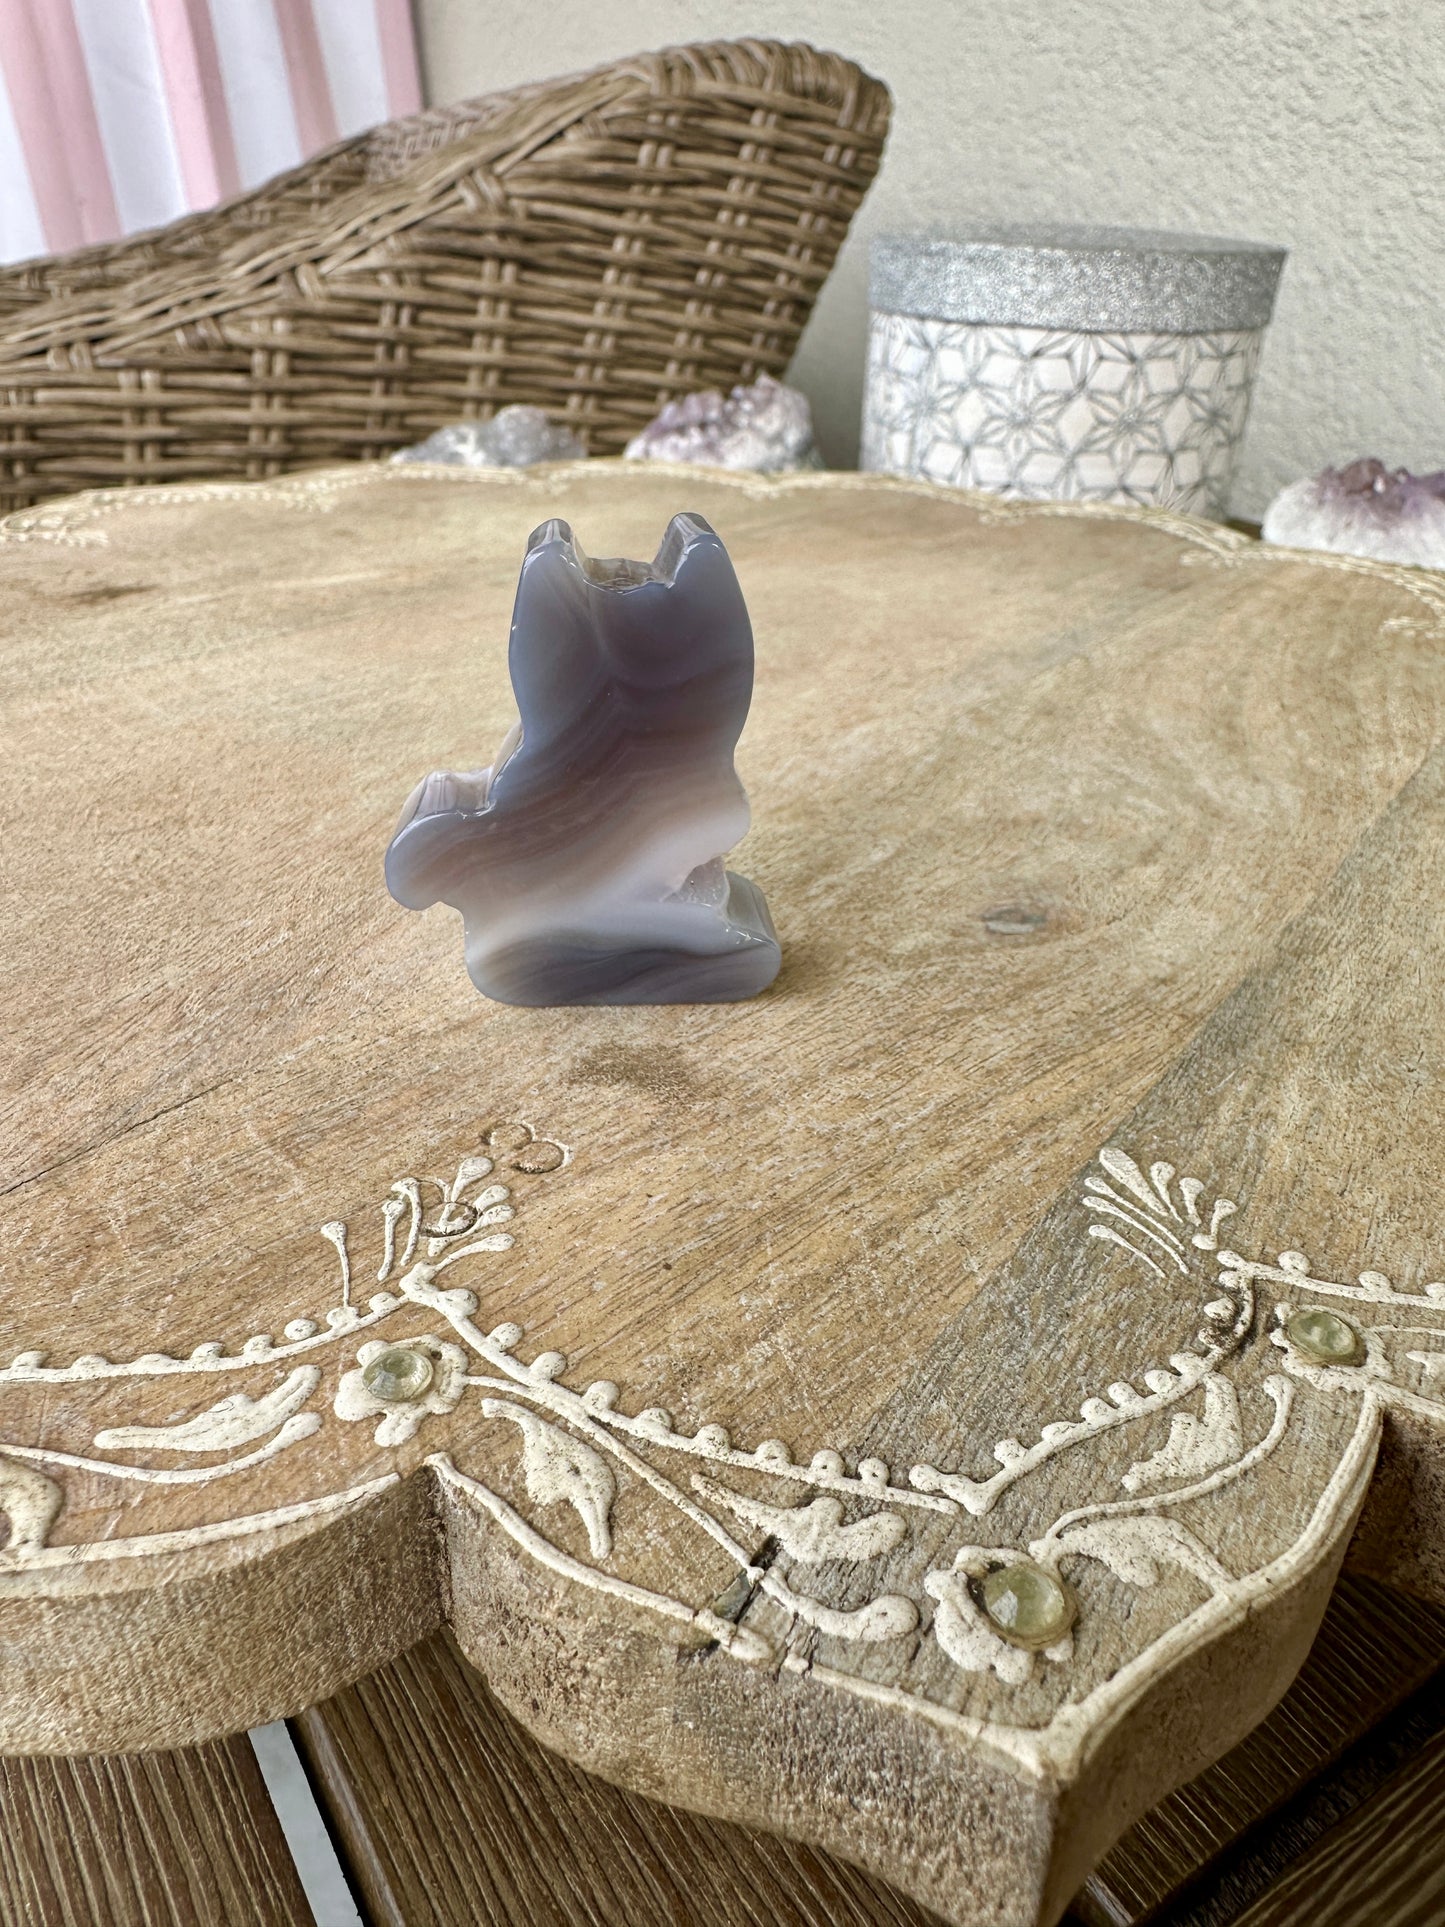 Agate Druzy Cat Carving: Unique Handcrafted Gemstone Decor, Sparkling Natural Beauty for Cat Lovers & Crystal Collectors